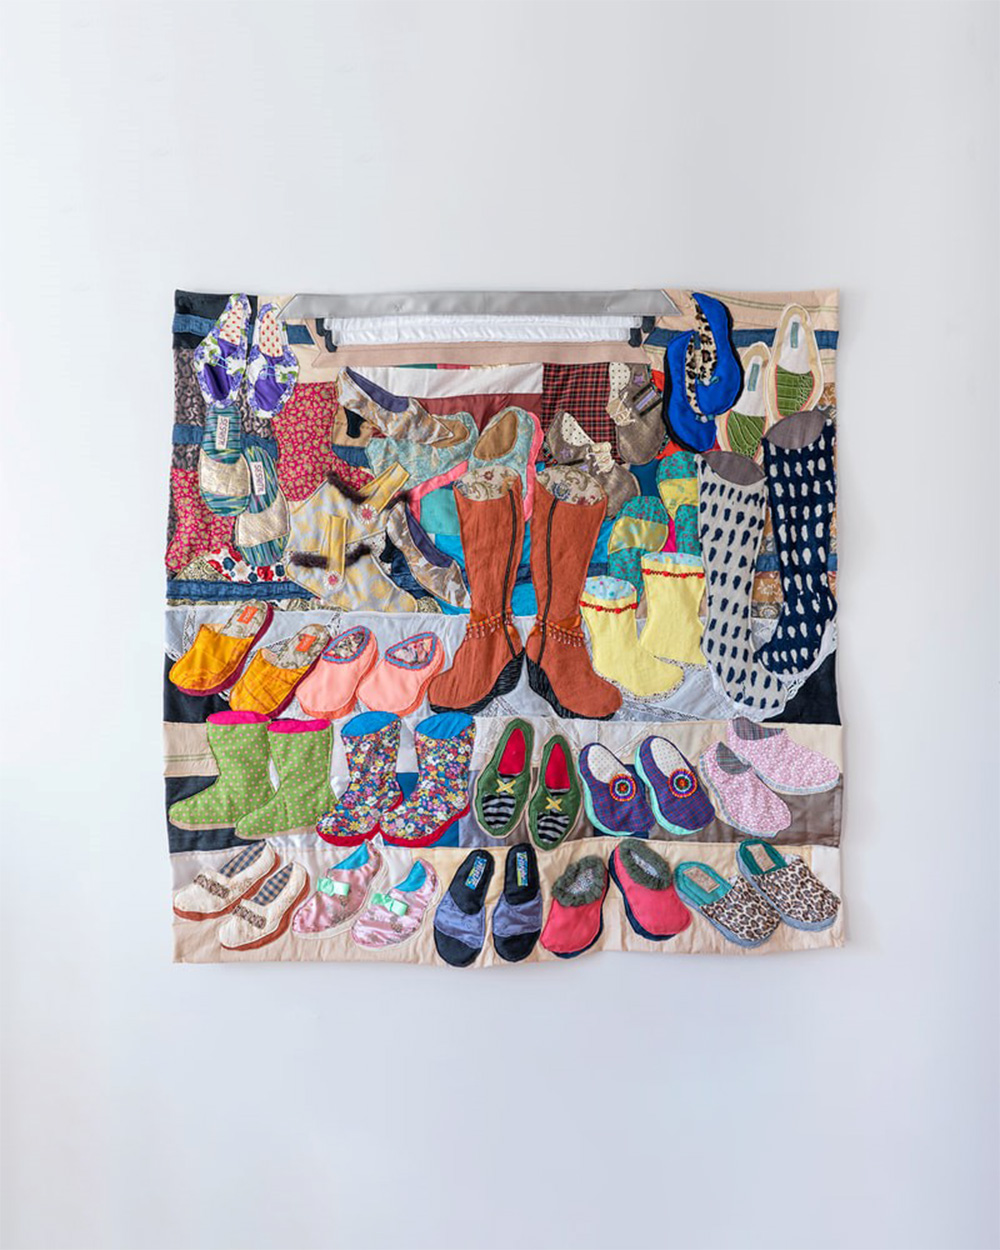 Woomin Kim (born in Korea, works in United States, 1986), Shijang: Shoe Store II, 2022, fabric, mixed media, Museum Purchase: Mary Light Meyer Charitable Trust, 2023.17